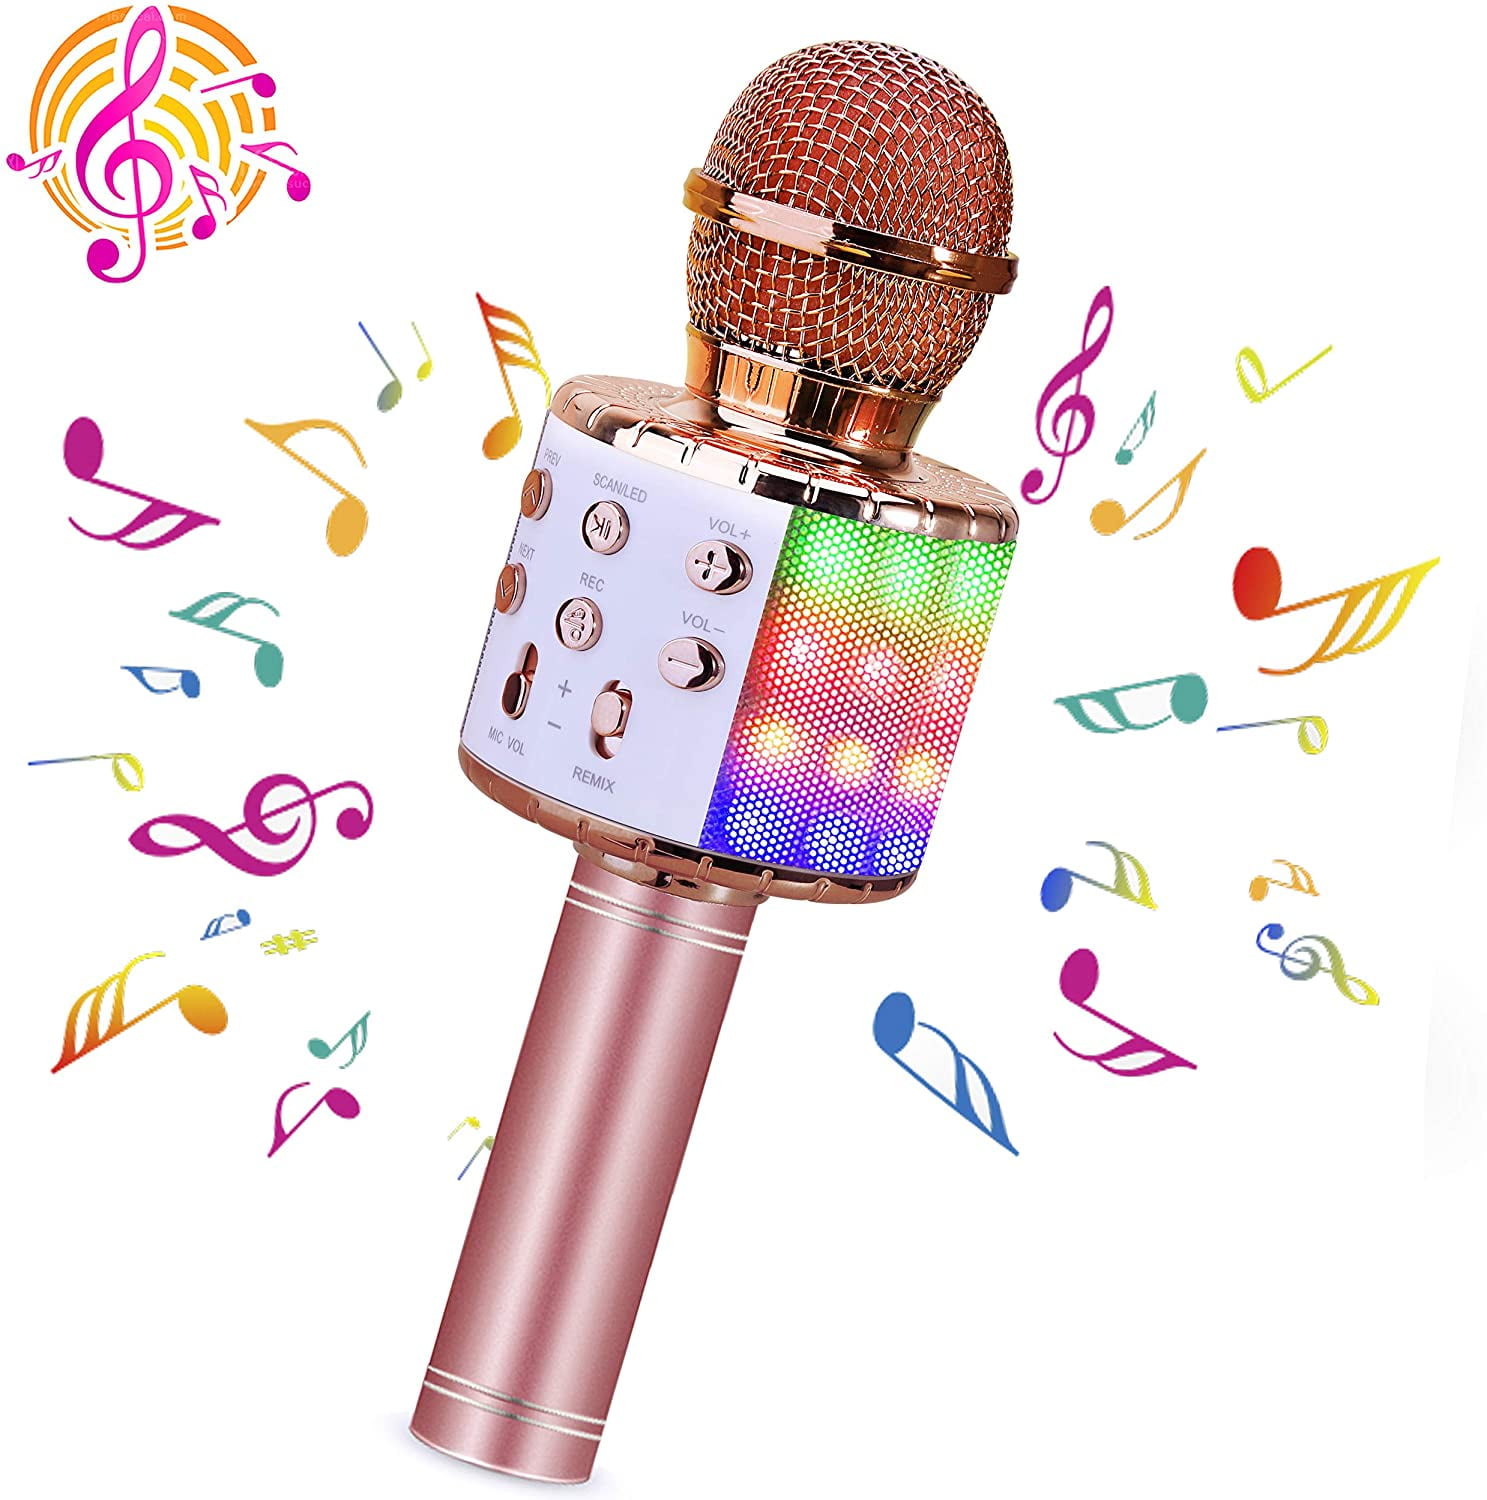 Red CYY Karaoke Wireless Microphone Toys for Kids,Portable Bluetooth Handheld Microphone Speaker with LED Lights,Birthday Party,Festivals,Outdoor Activity Gifts for Boys and Girls or Adults 